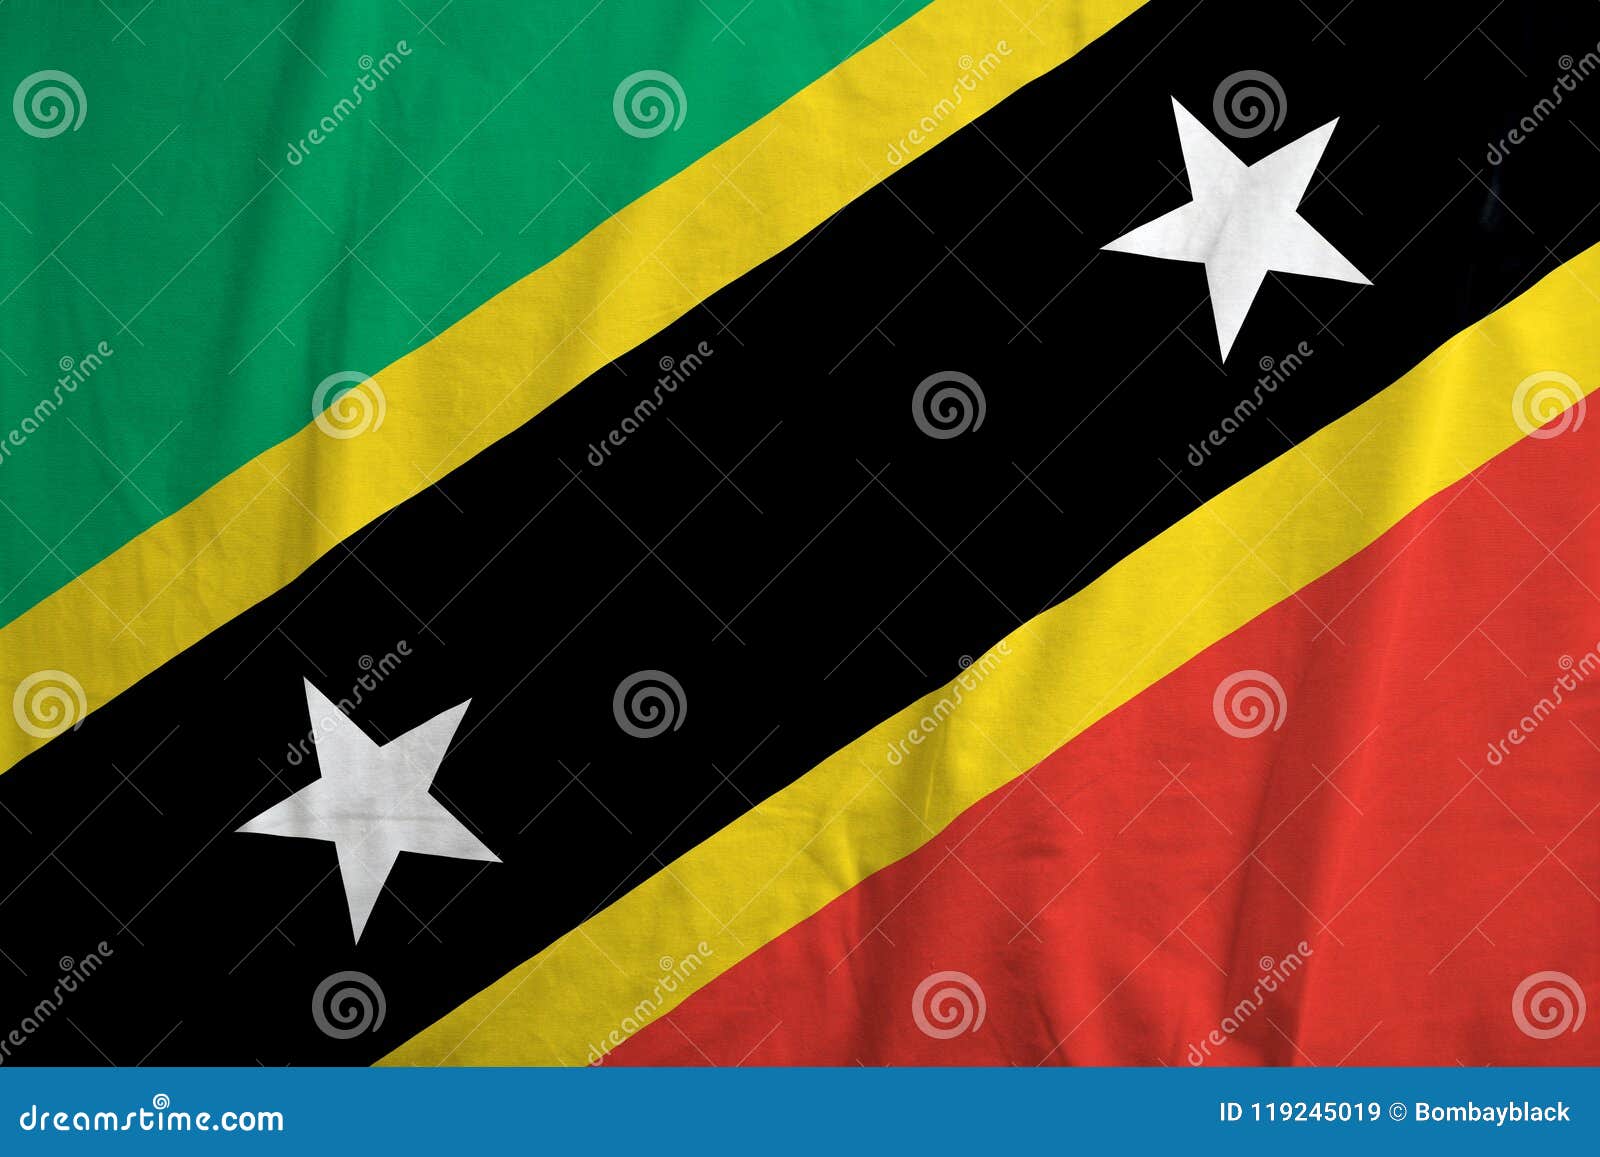 Flag of Saint Kitts and Nevis Waving. Stock Image - Image of insignia